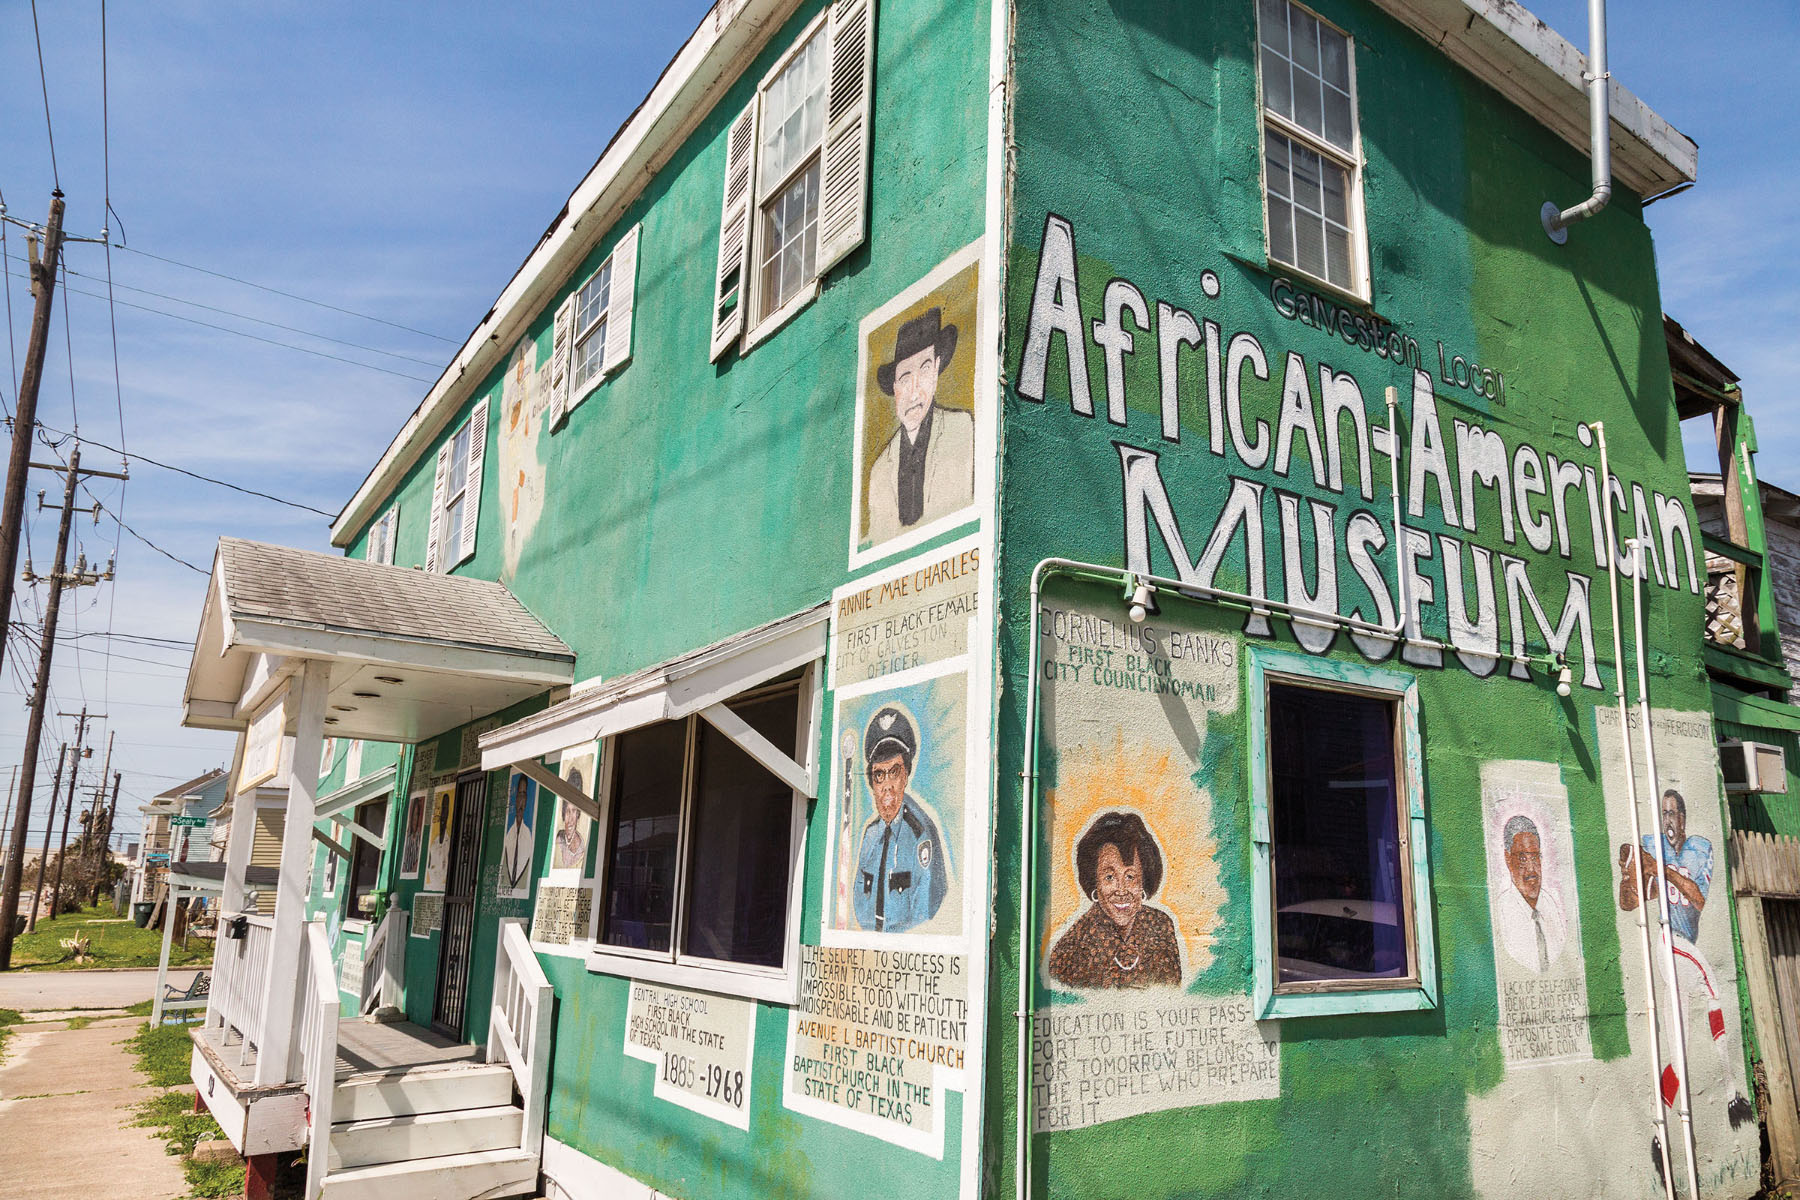 A green building reading "African-American Museum" on the side with small painted portraits